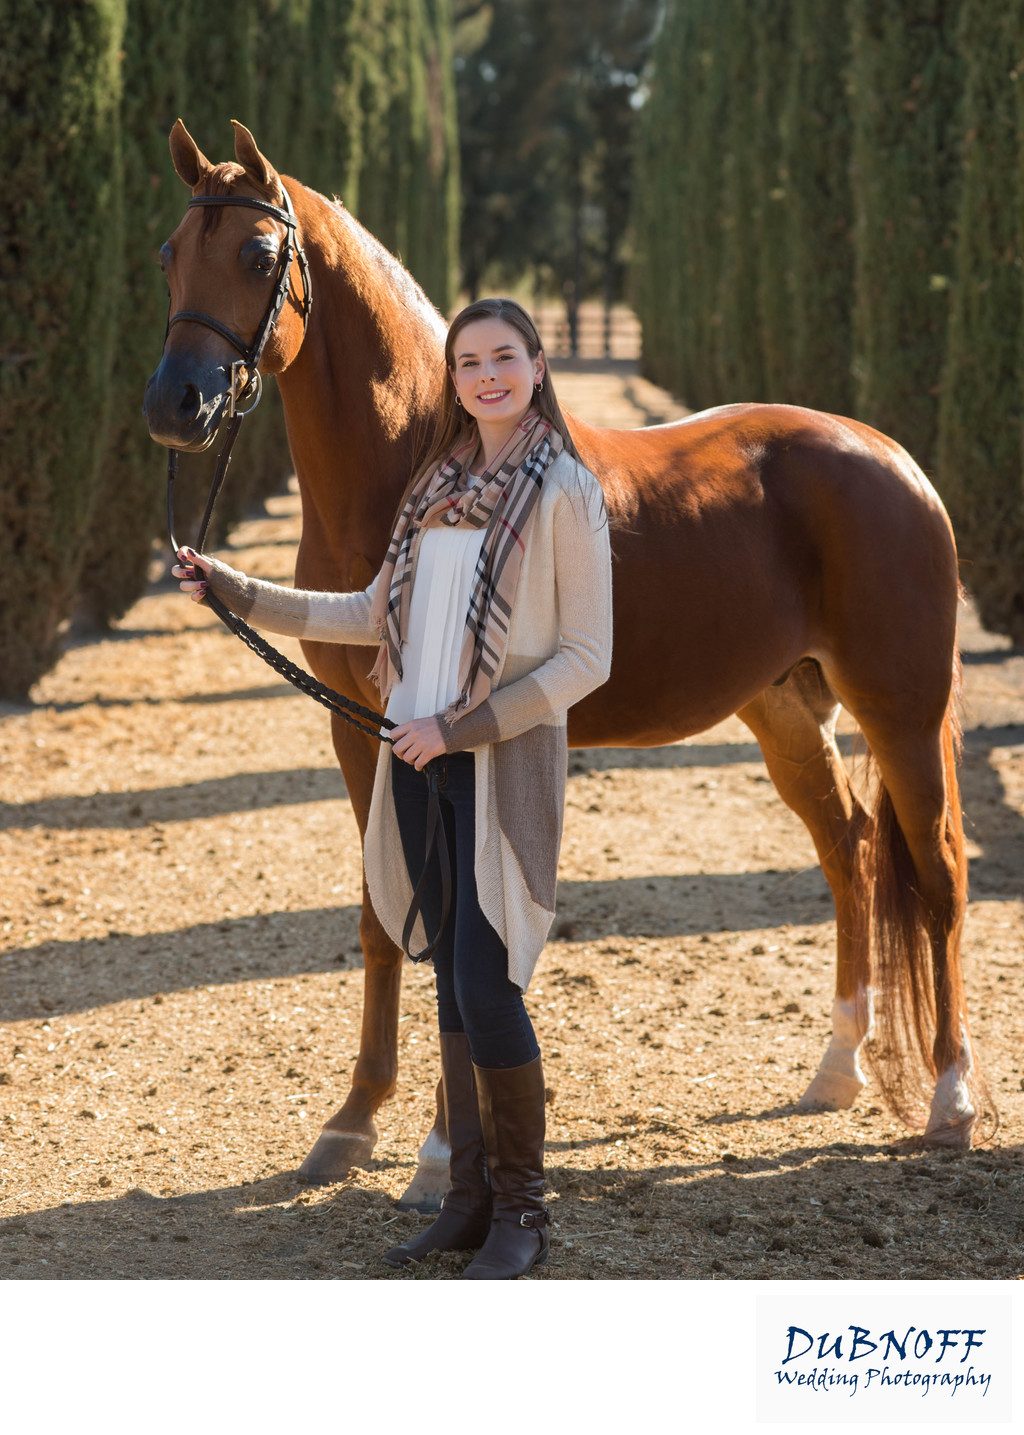 Outdoor Equine Photography in San Francisco and the Greater Bay Area